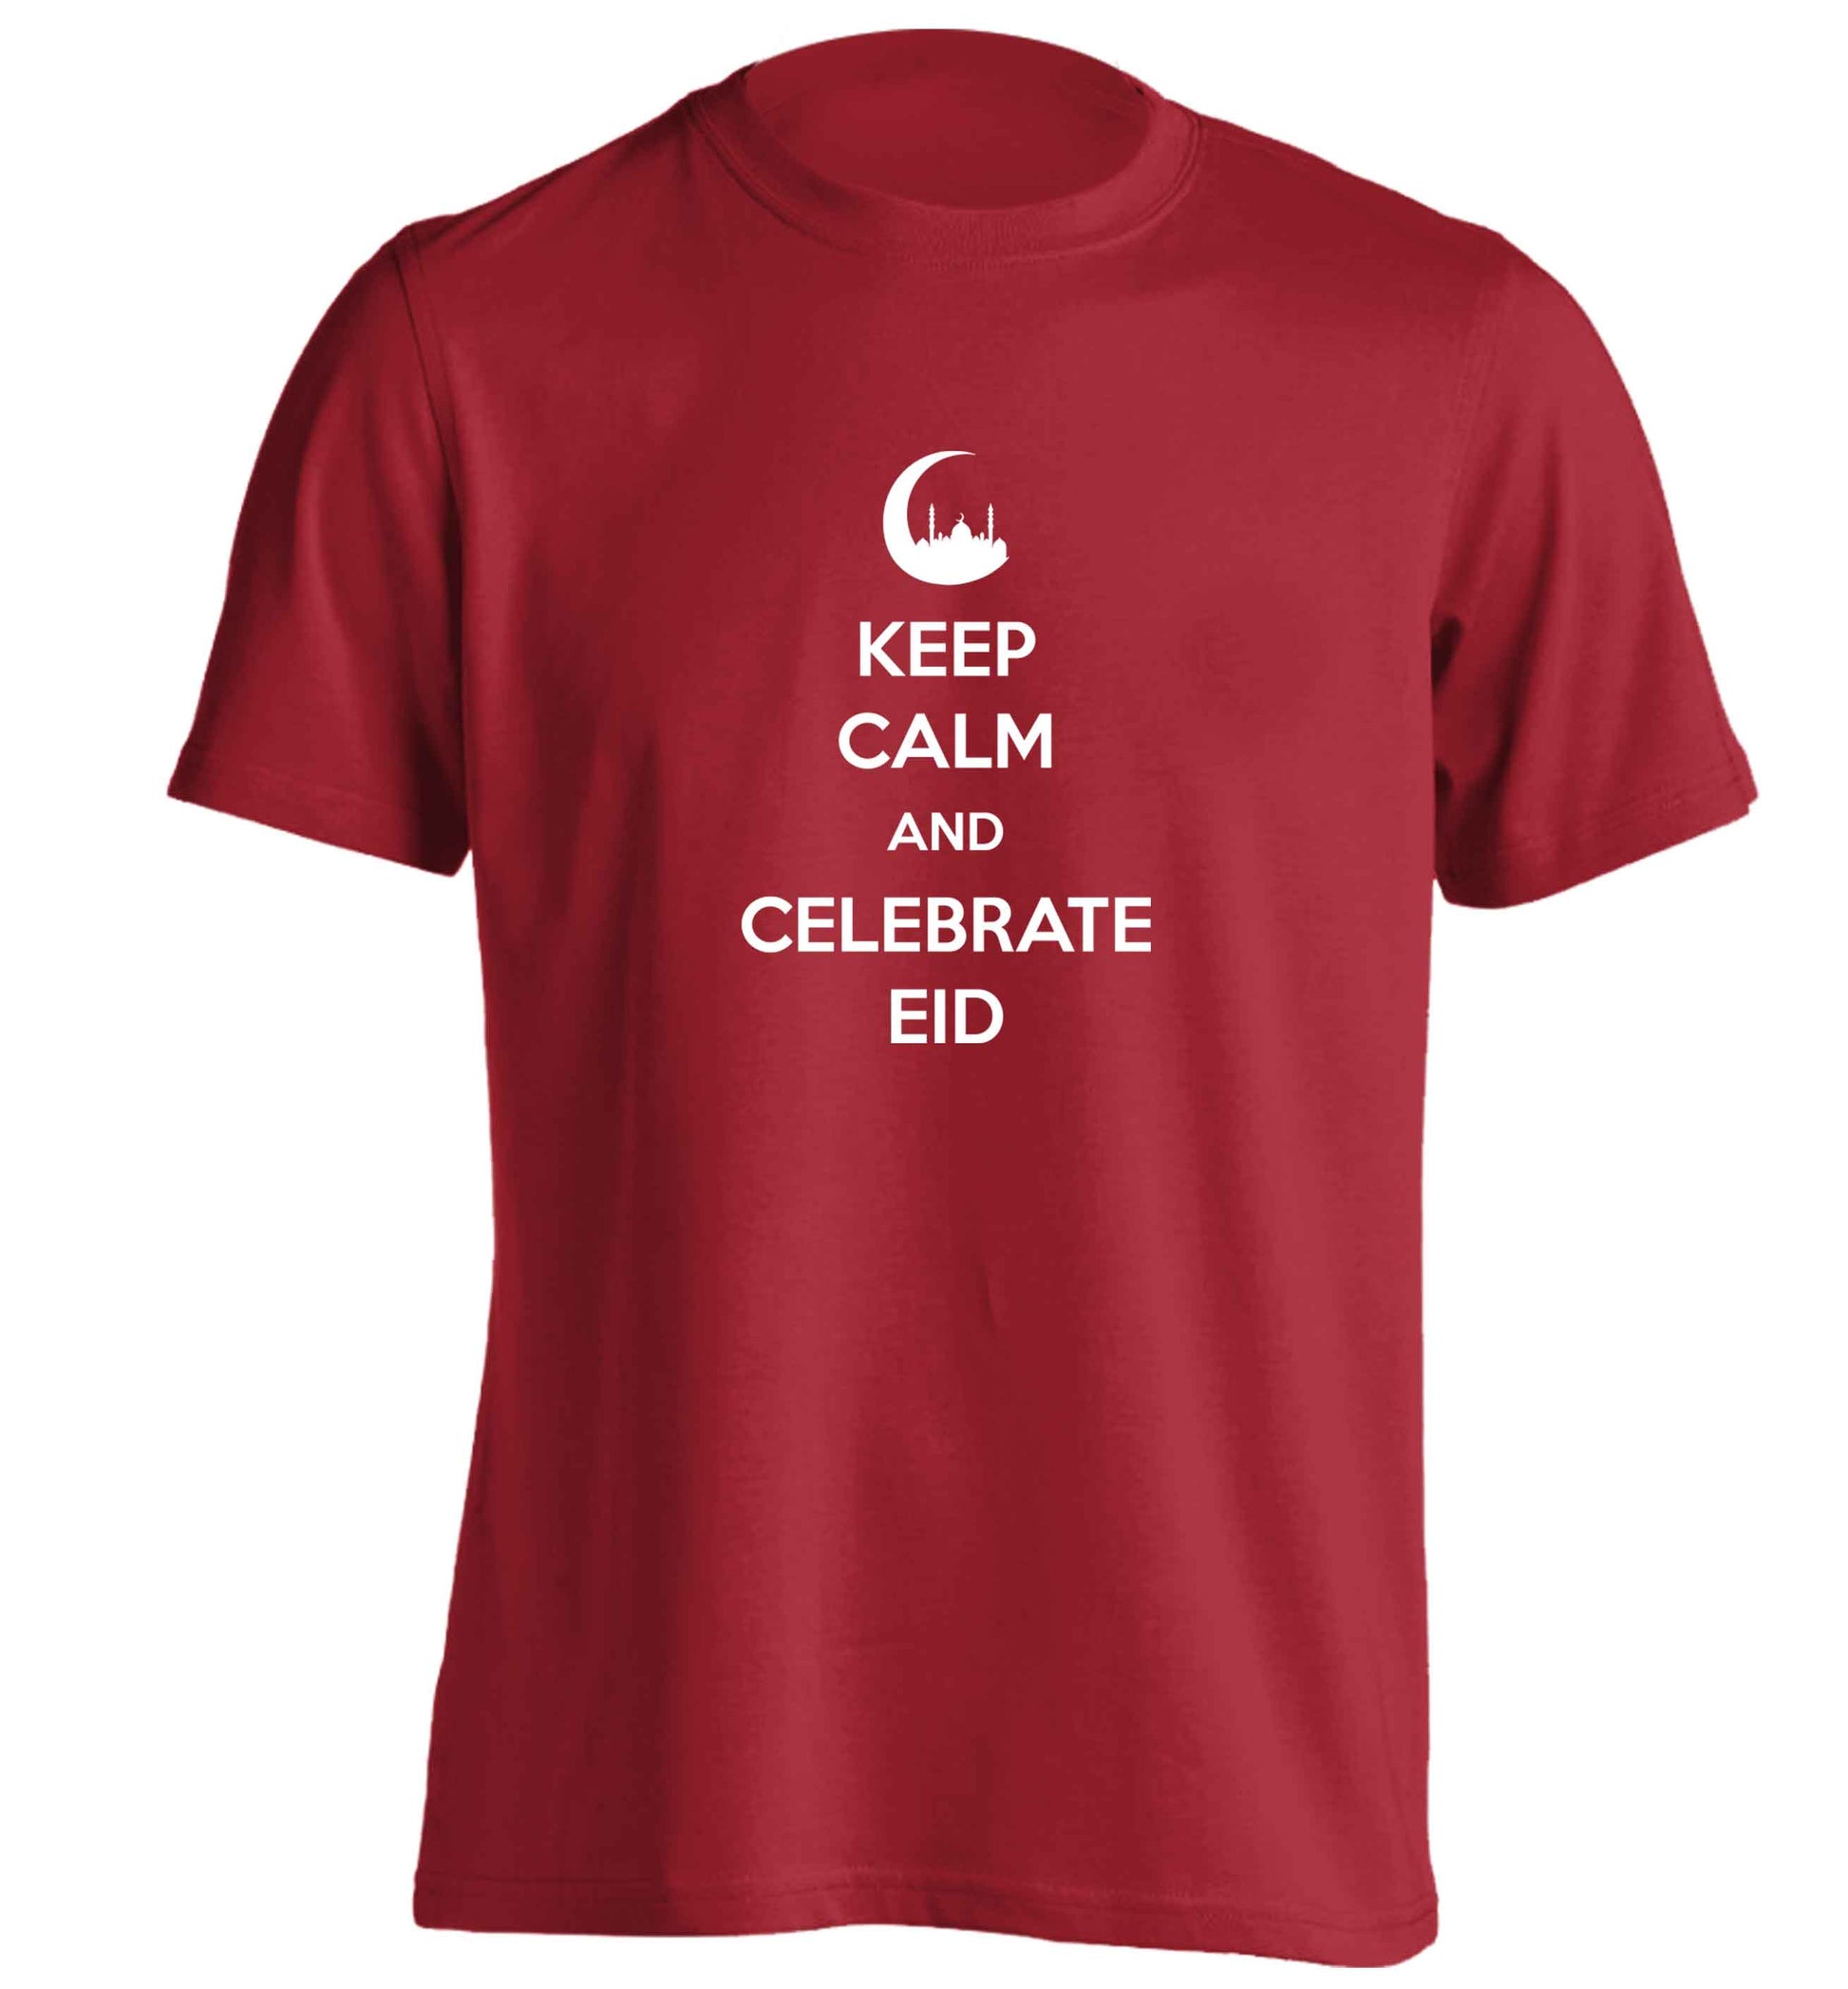 Keep calm and celebrate Eid adults unisex red Tshirt 2XL